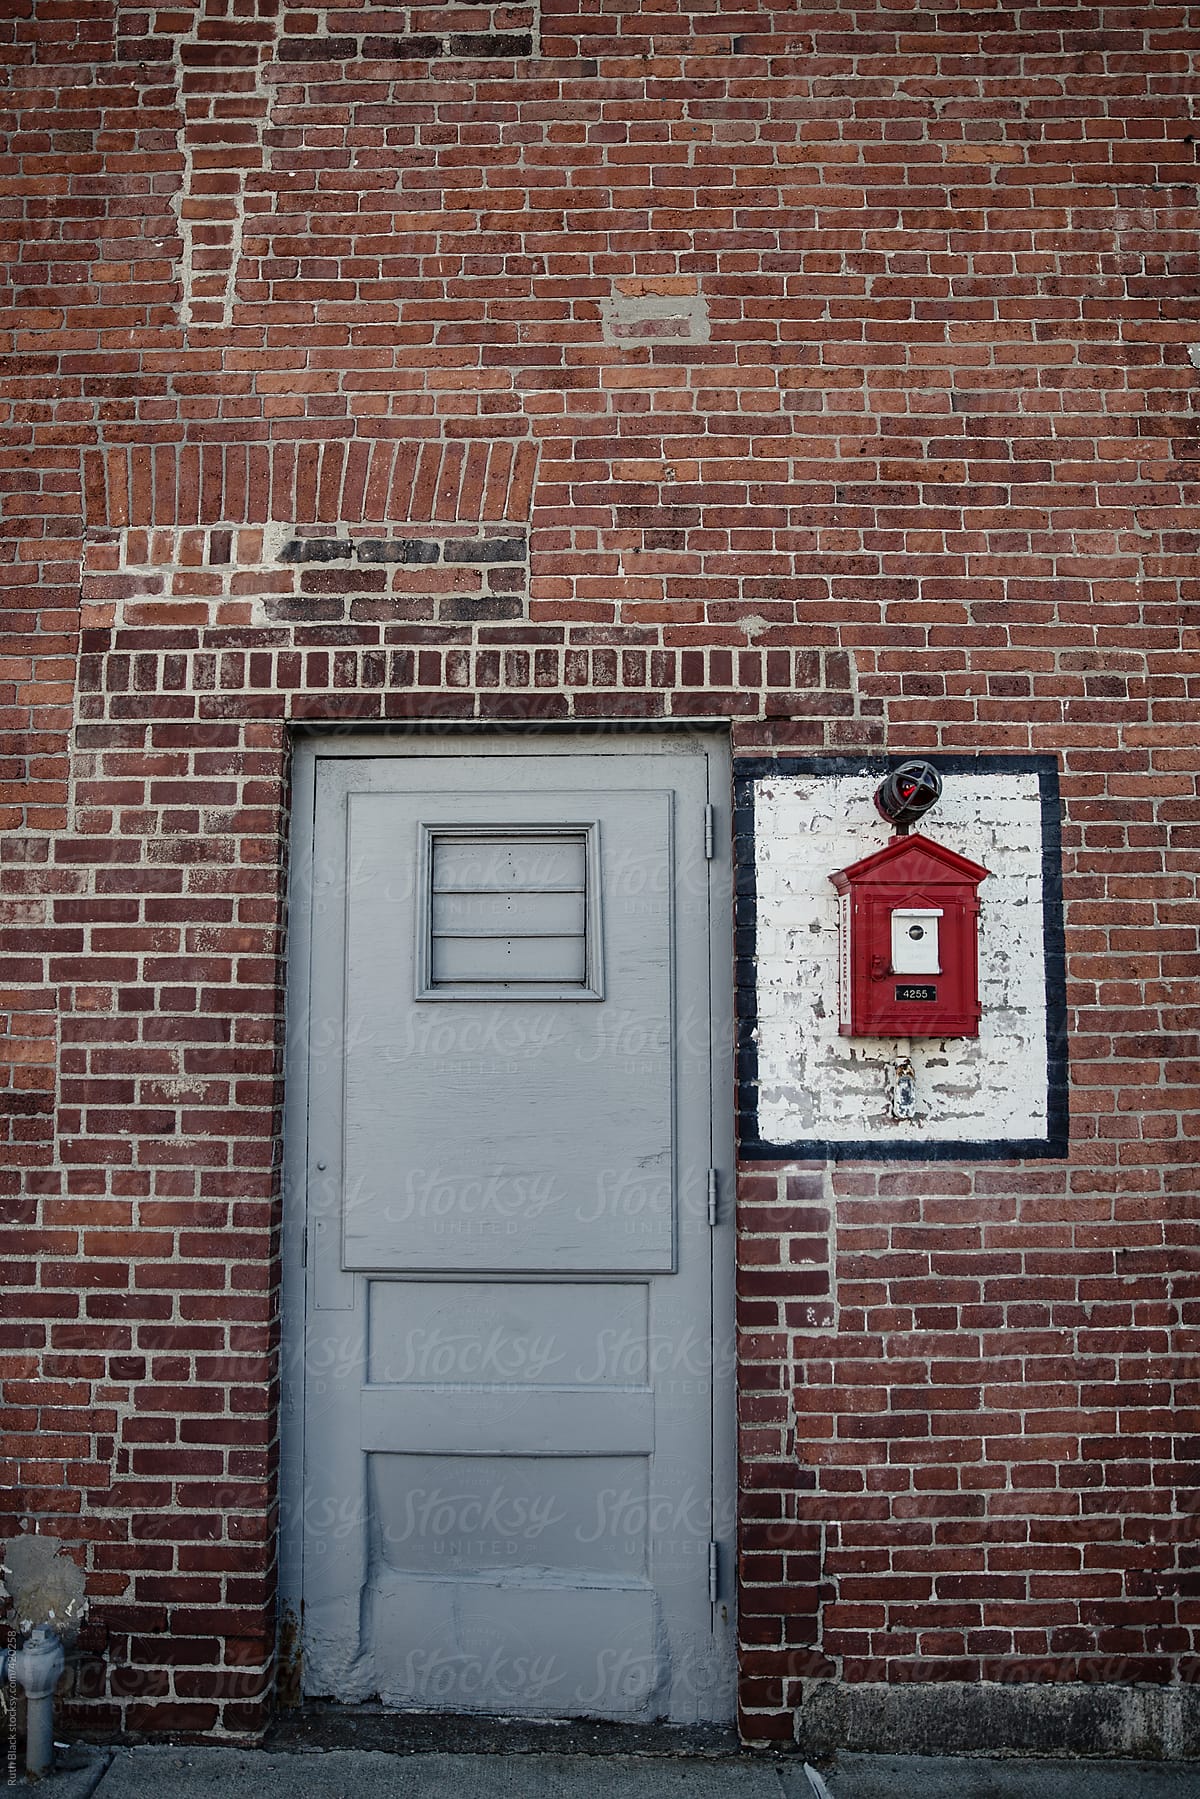 Steel door and vintage fire alarm box on red brick wall